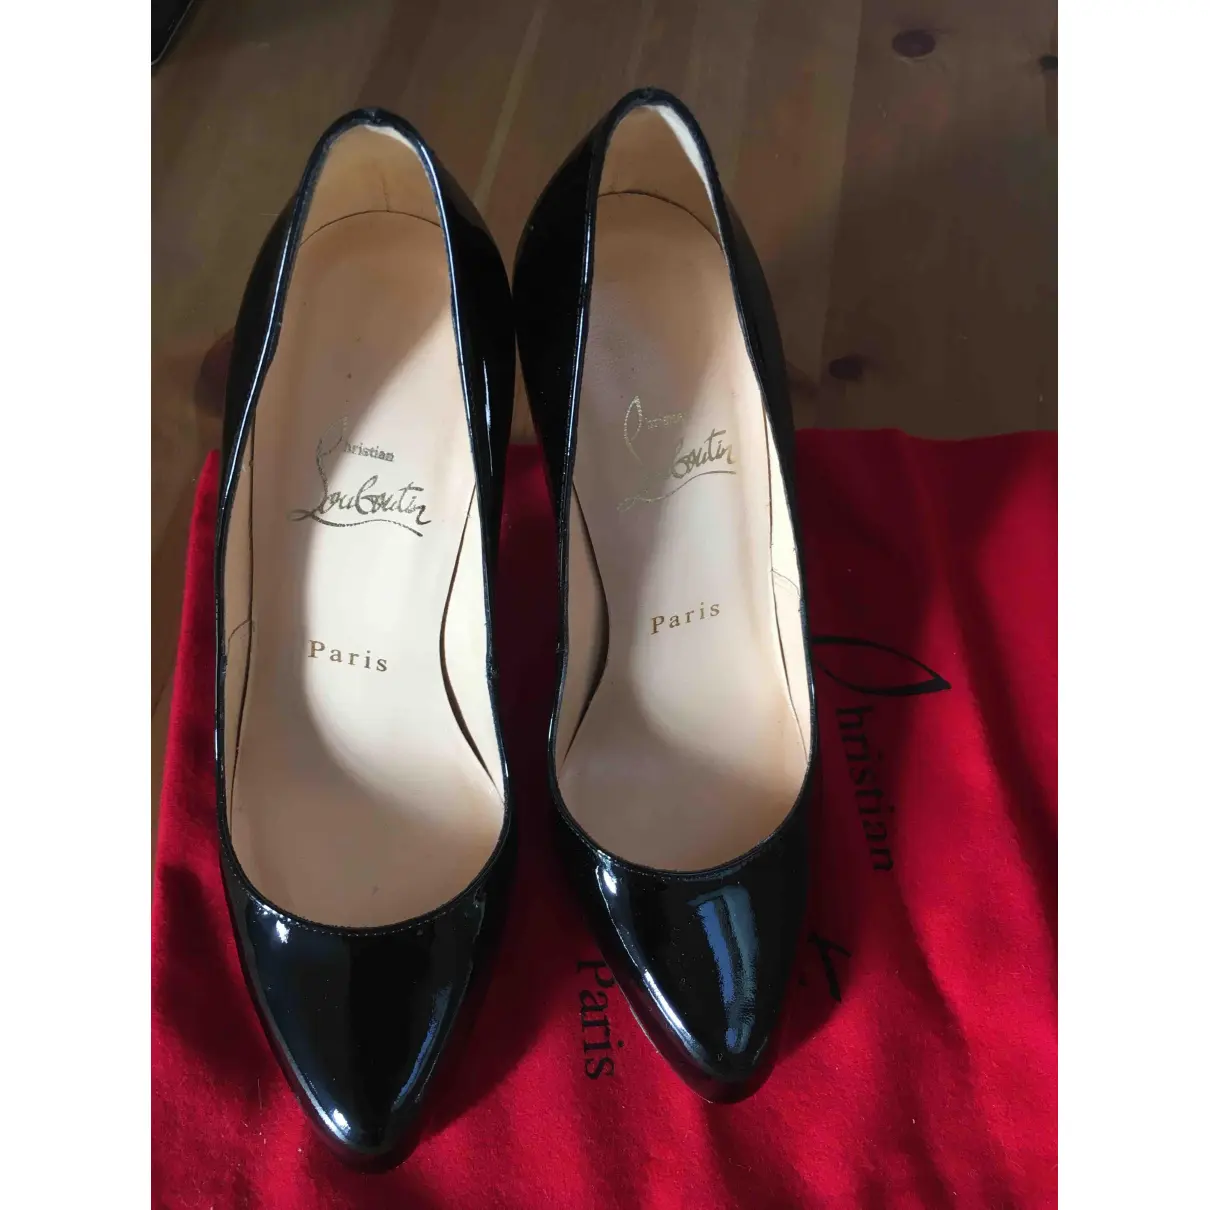 Buy Christian Louboutin Simple pump patent leather heels online